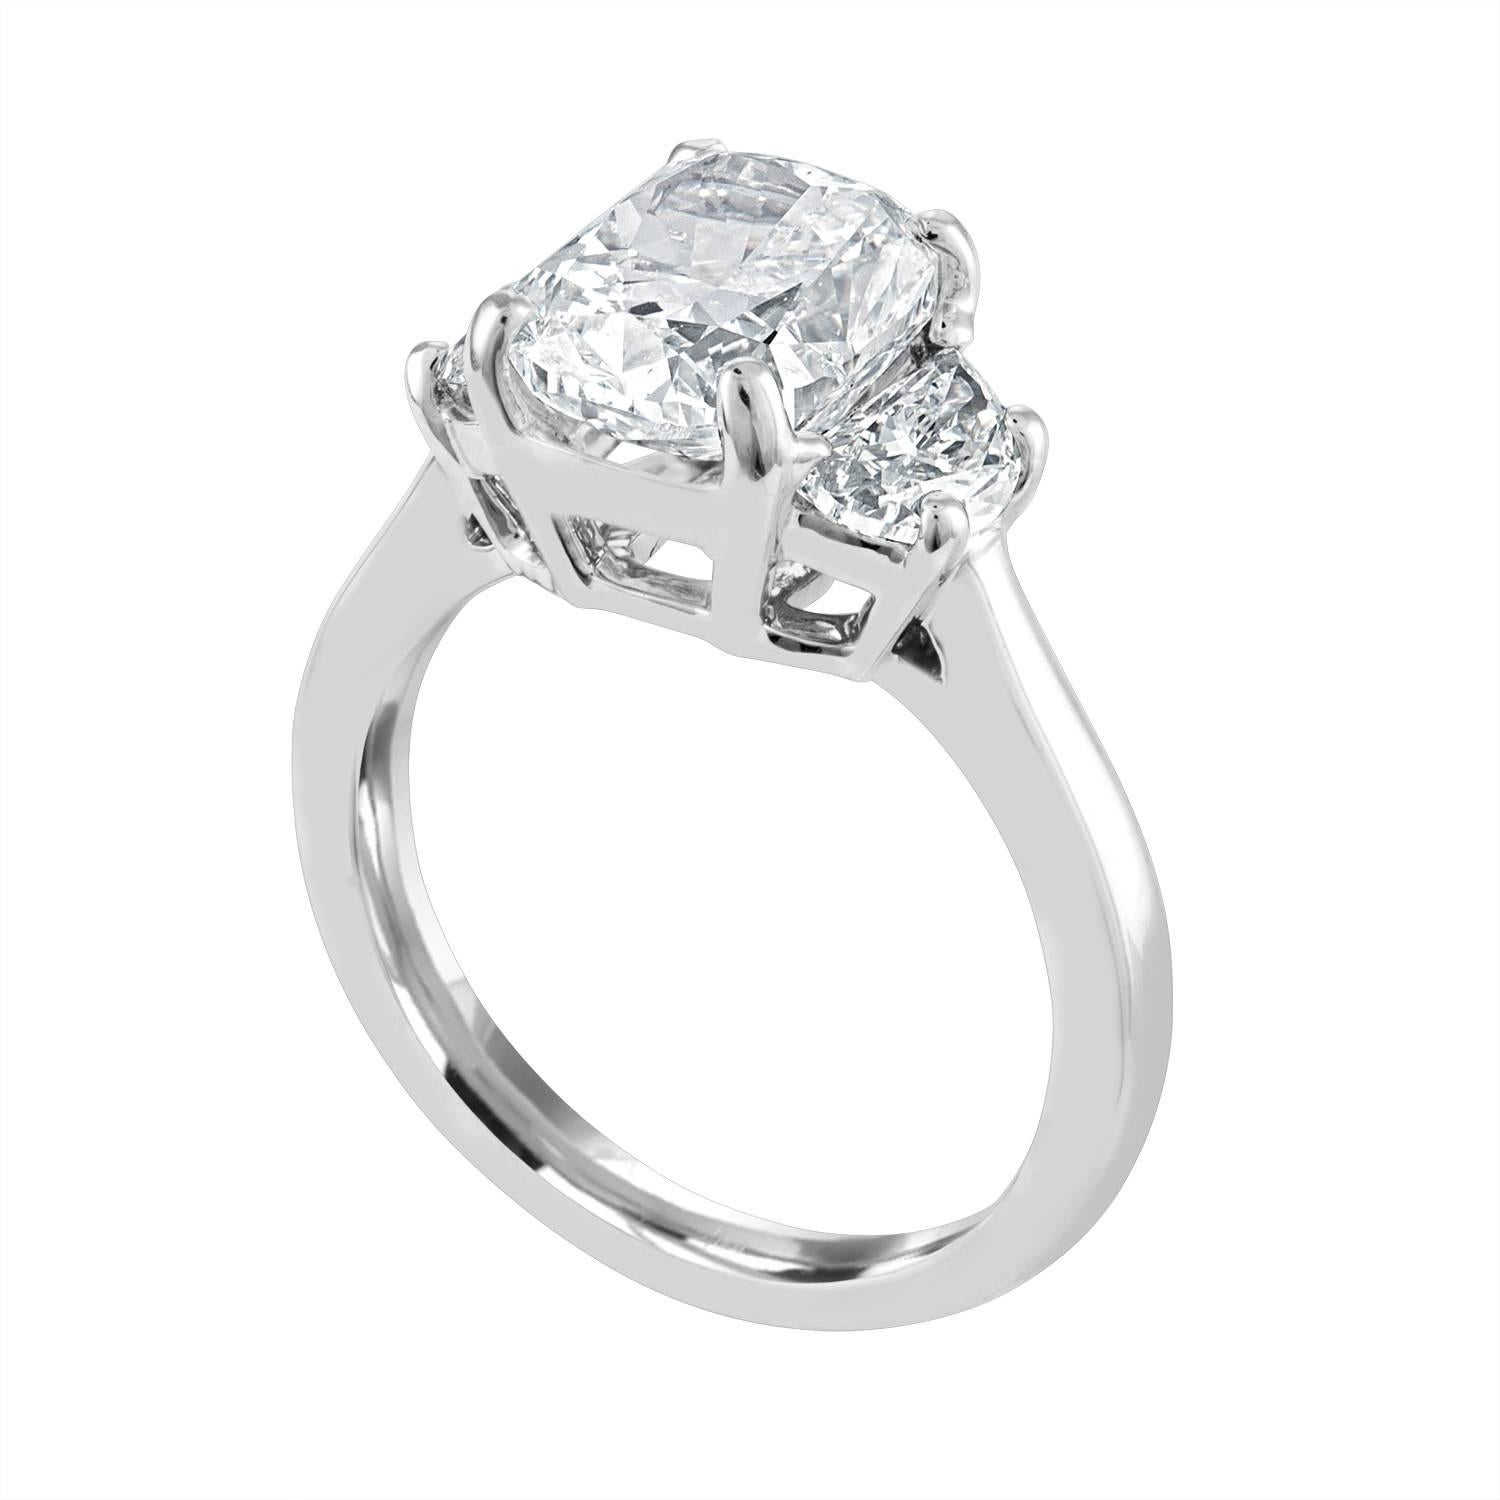 Contemporary 3.03 Carat Cushion, GIA Certified, Set in Three-Stone Platinum Ring